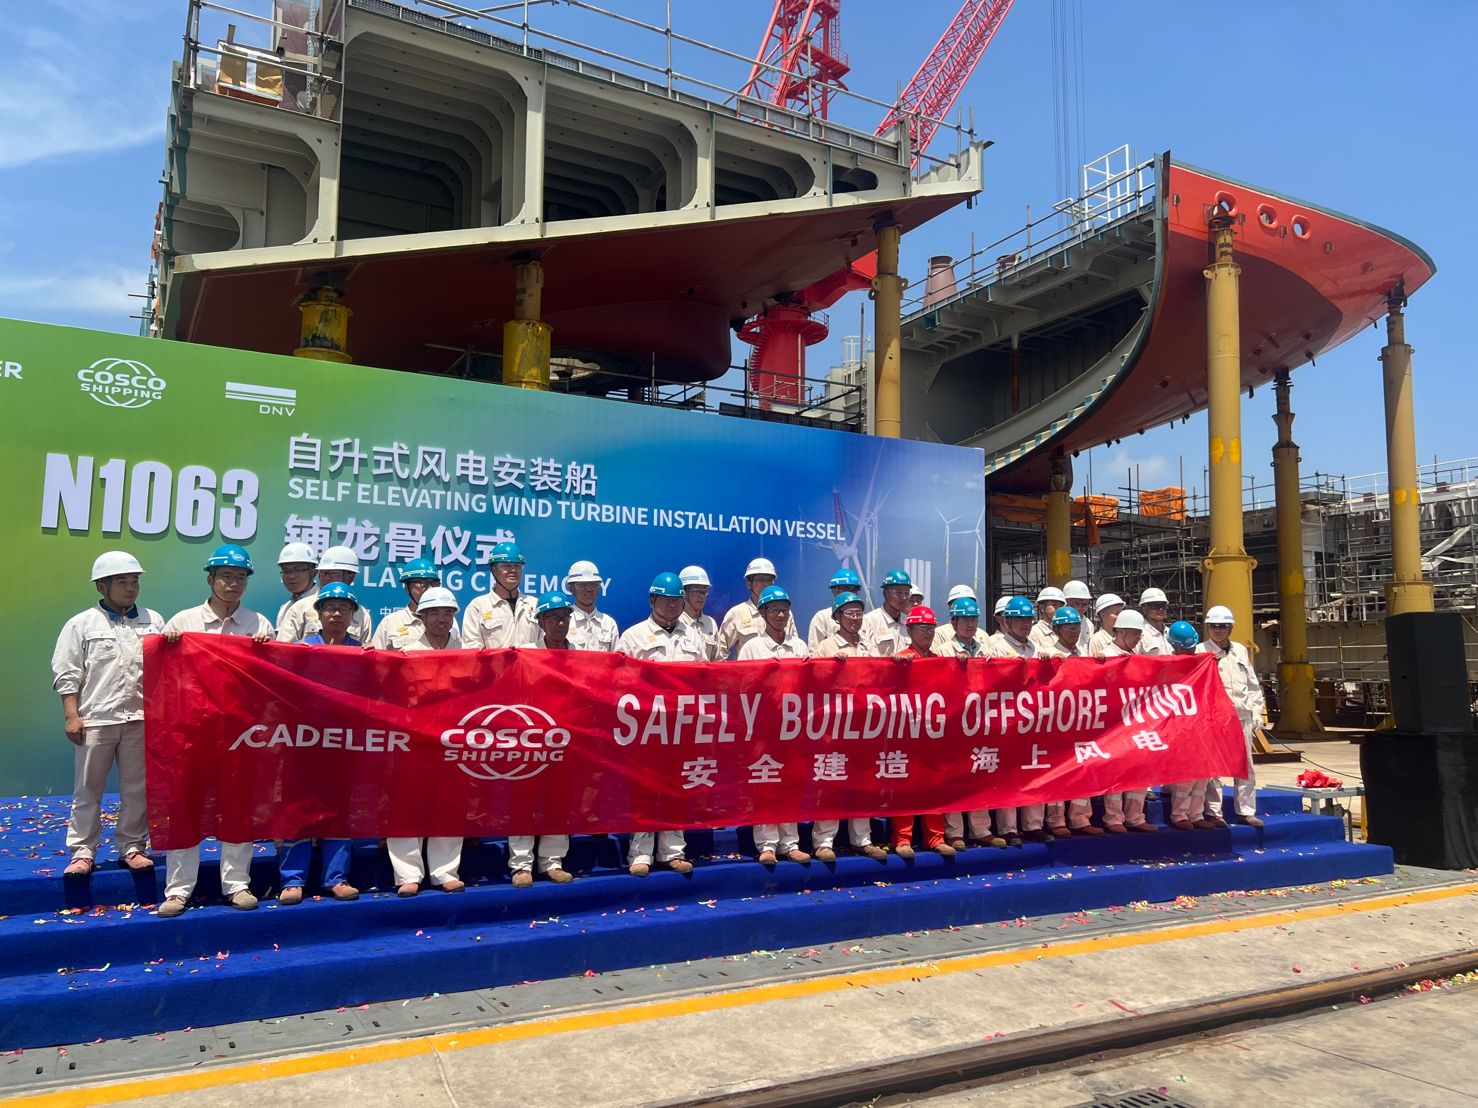 Cadeler keel laying ceremony first x-class vessel